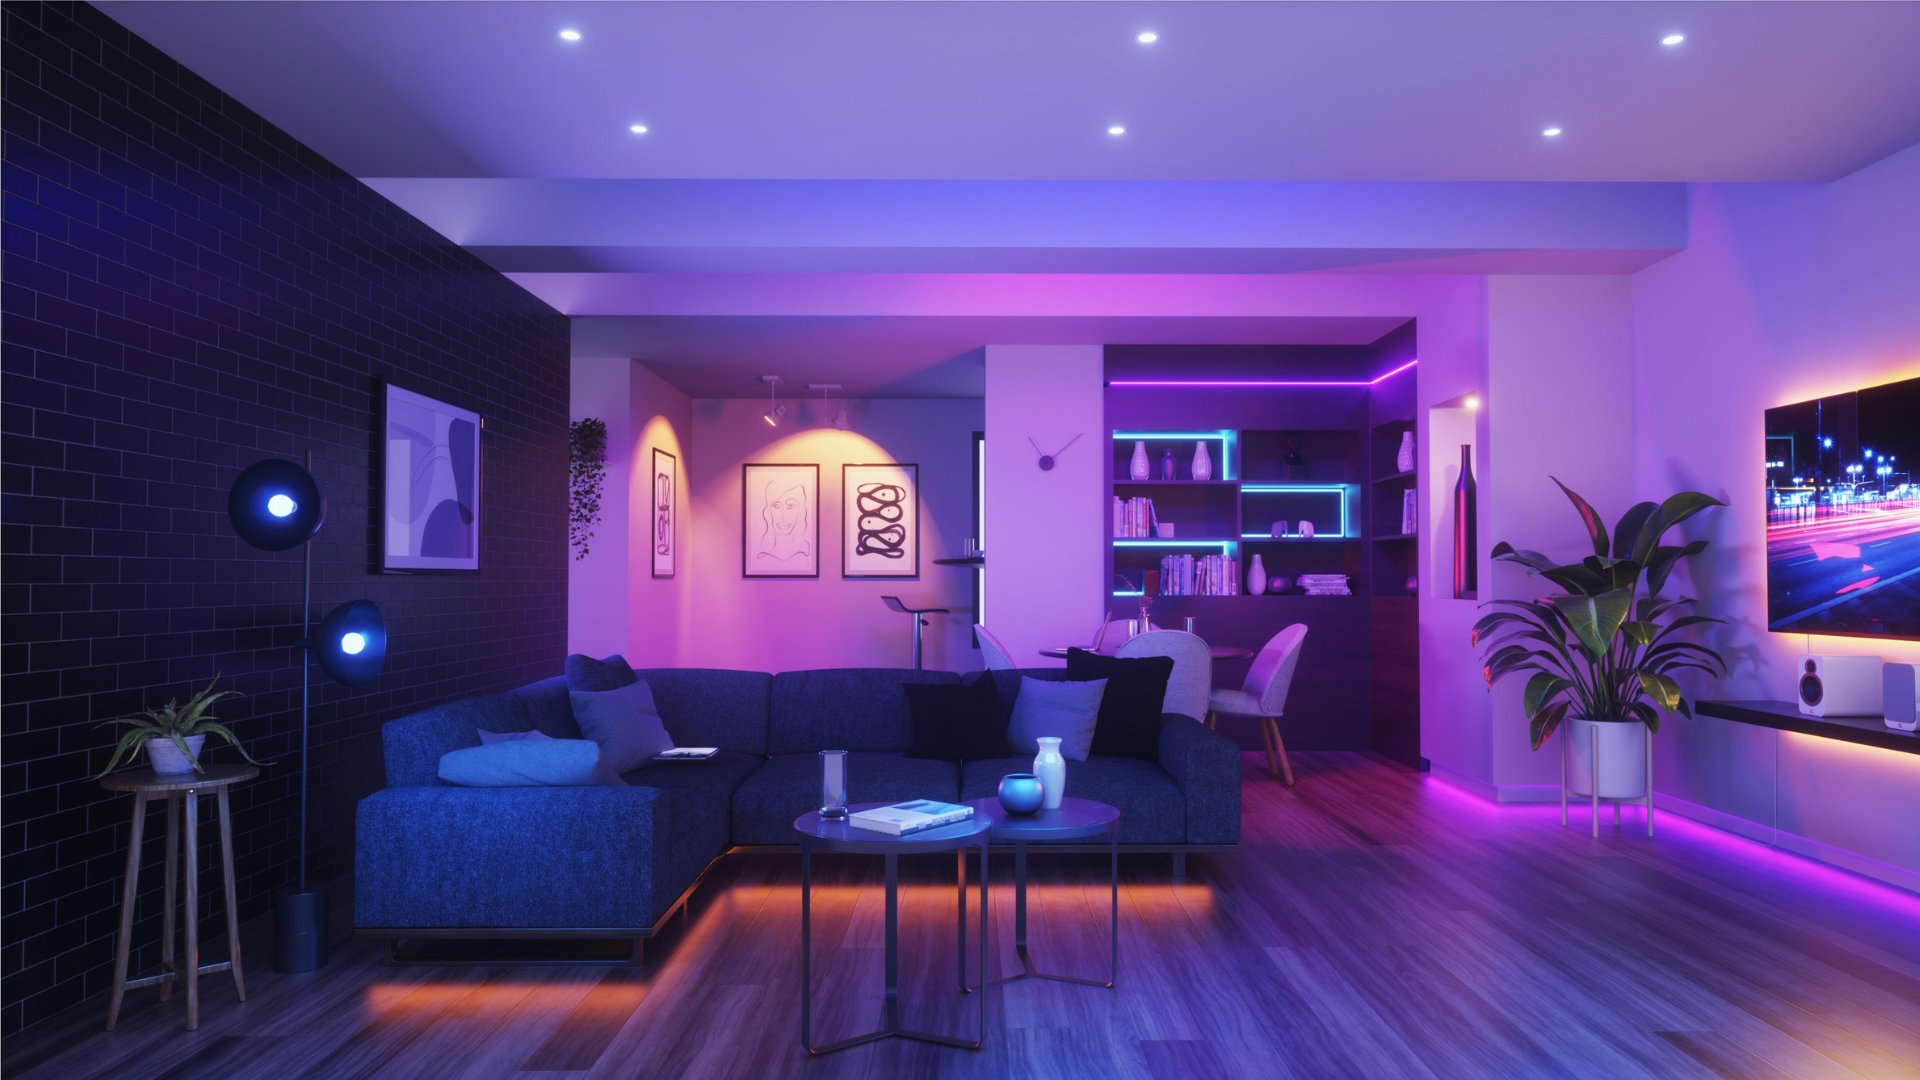 Philips Hue Lightstrip Plus Review: Great Accent Lighting Around Your House